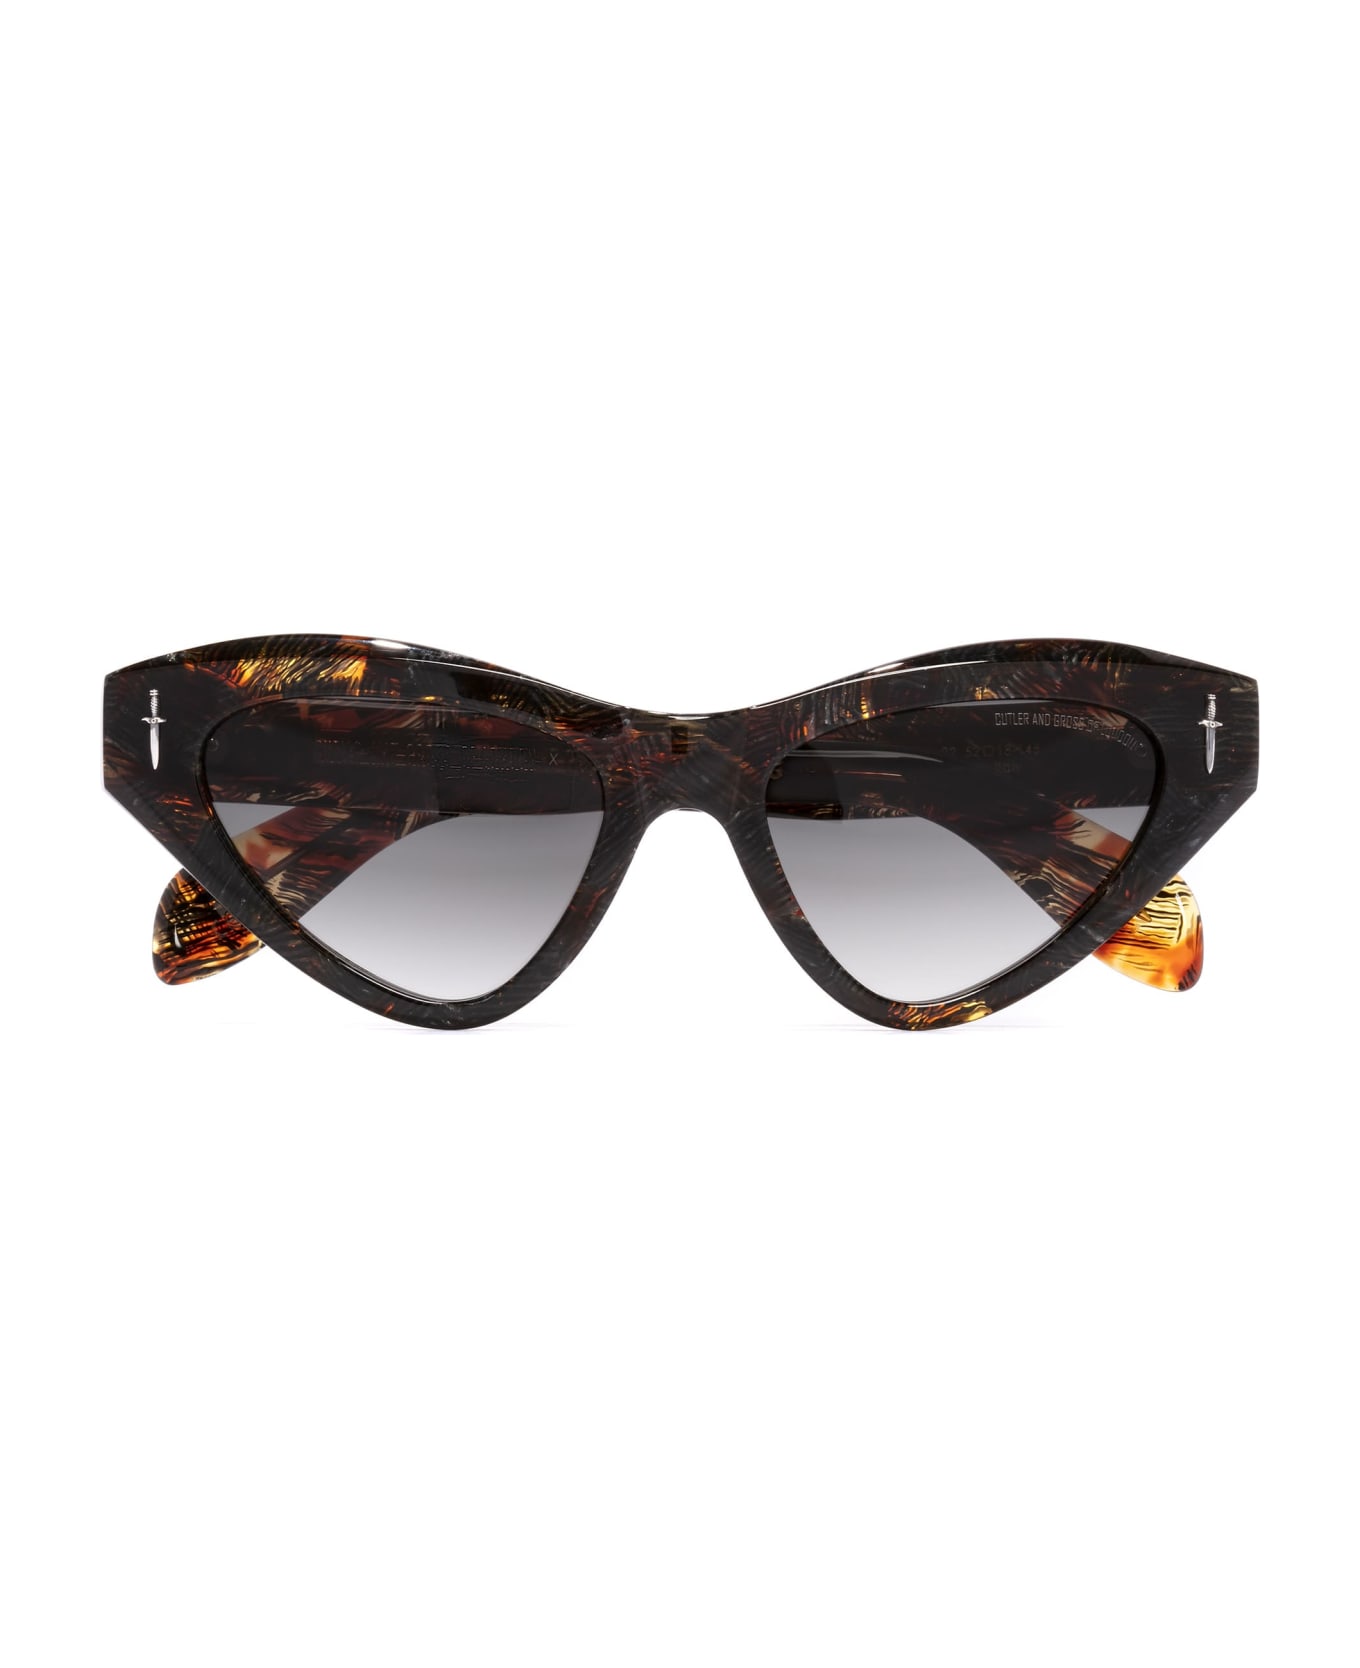 Cutler and Gross The Great Frog - Mini / Brush Stroke Sunglasses - brown